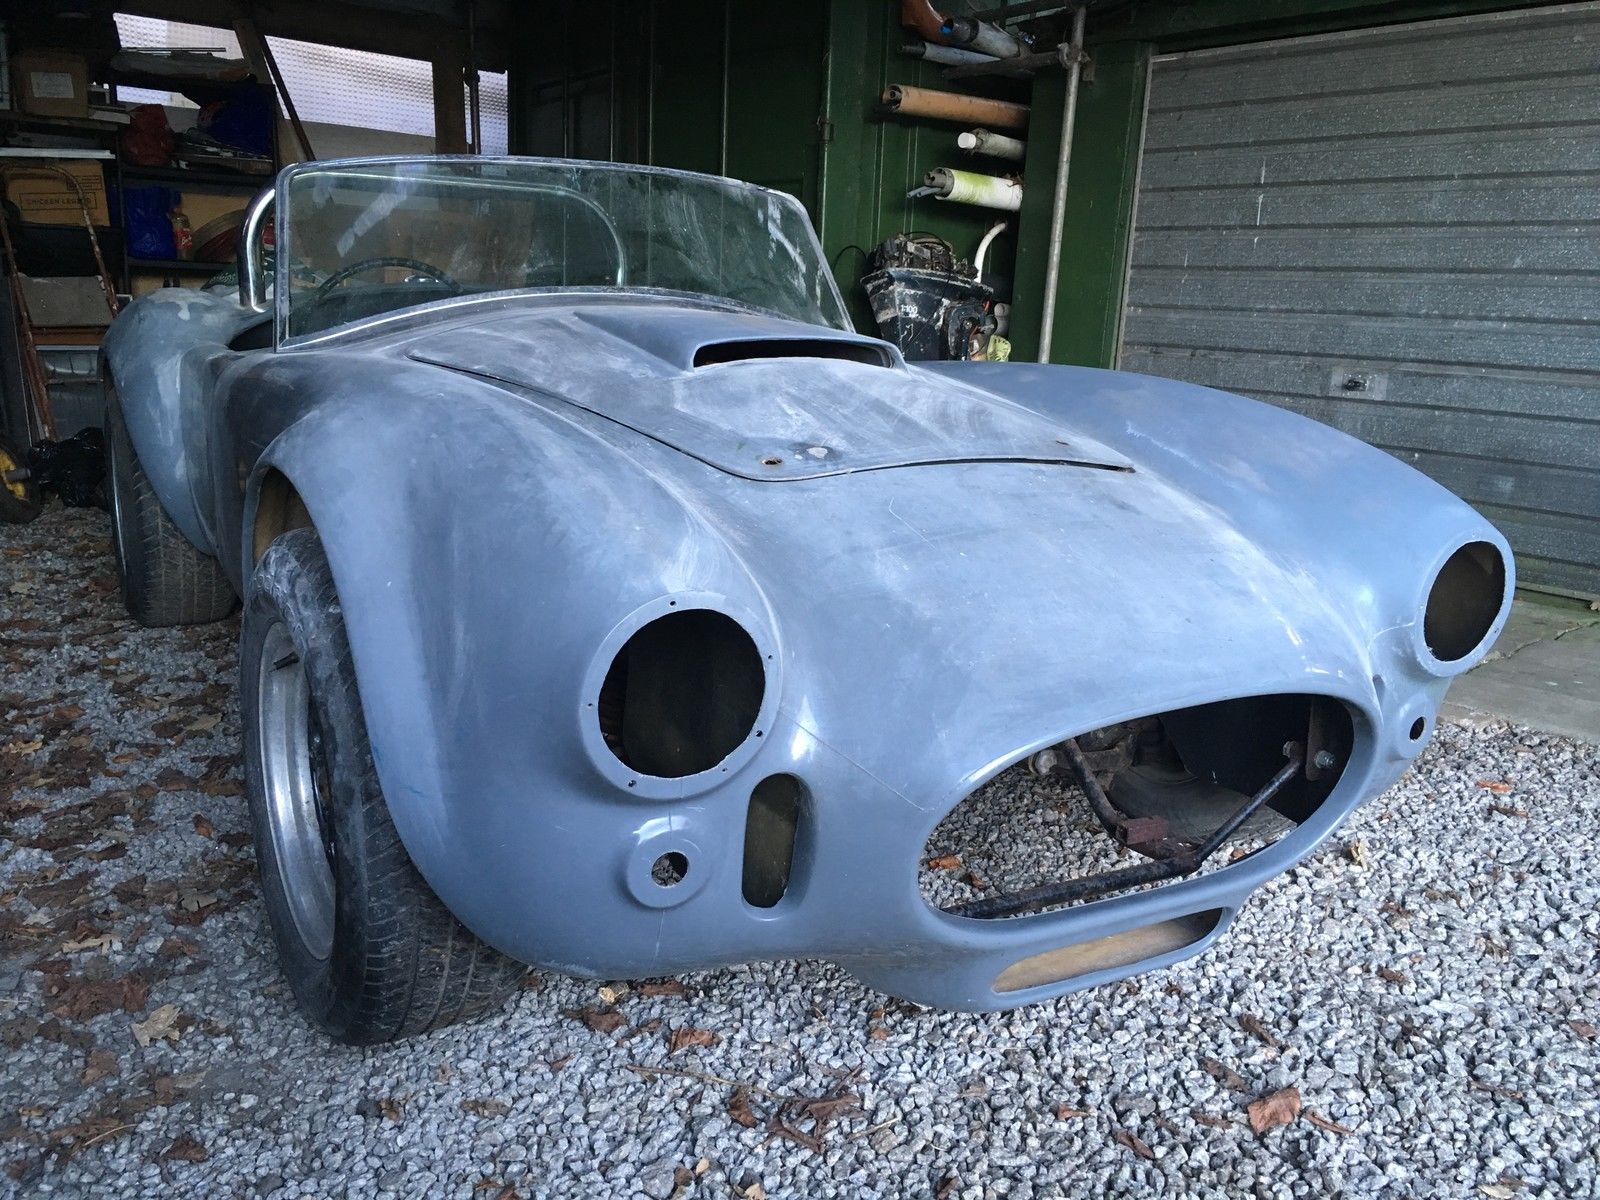 Classic Projects on Twitter: "Southern Roadcraft Cobra Kit Car